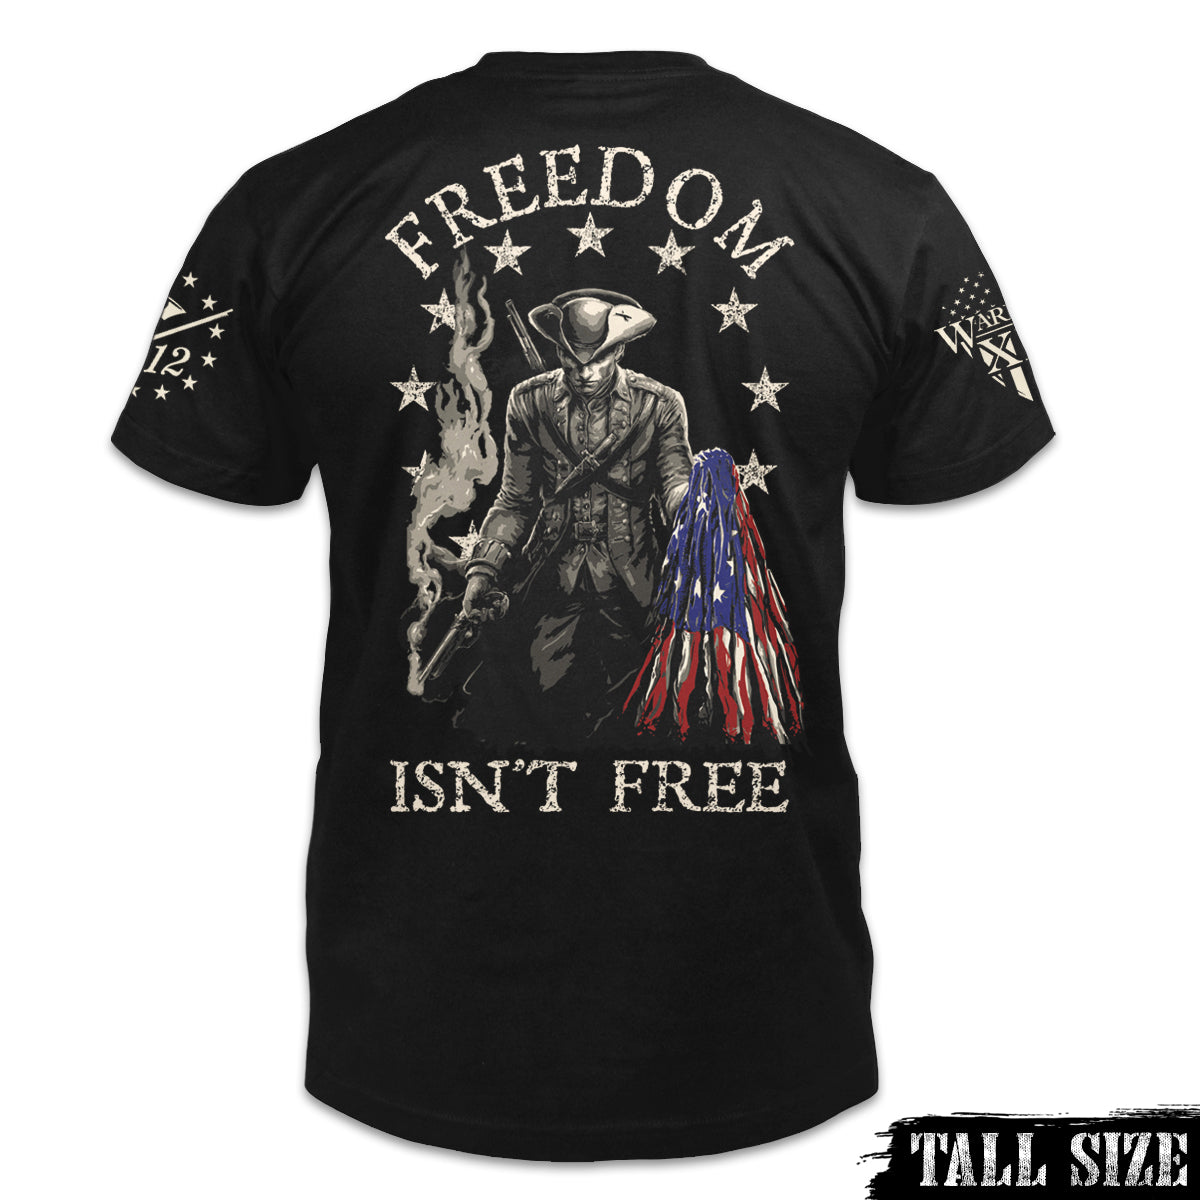 A black tall size shirt pays tribute to the Minuteman, the original American Patriot, and our forefathers who fought relentlessly against the tyranny of Britain.The back of the shirt has an infaltry soldier holding a ripped USA flag printed on it.